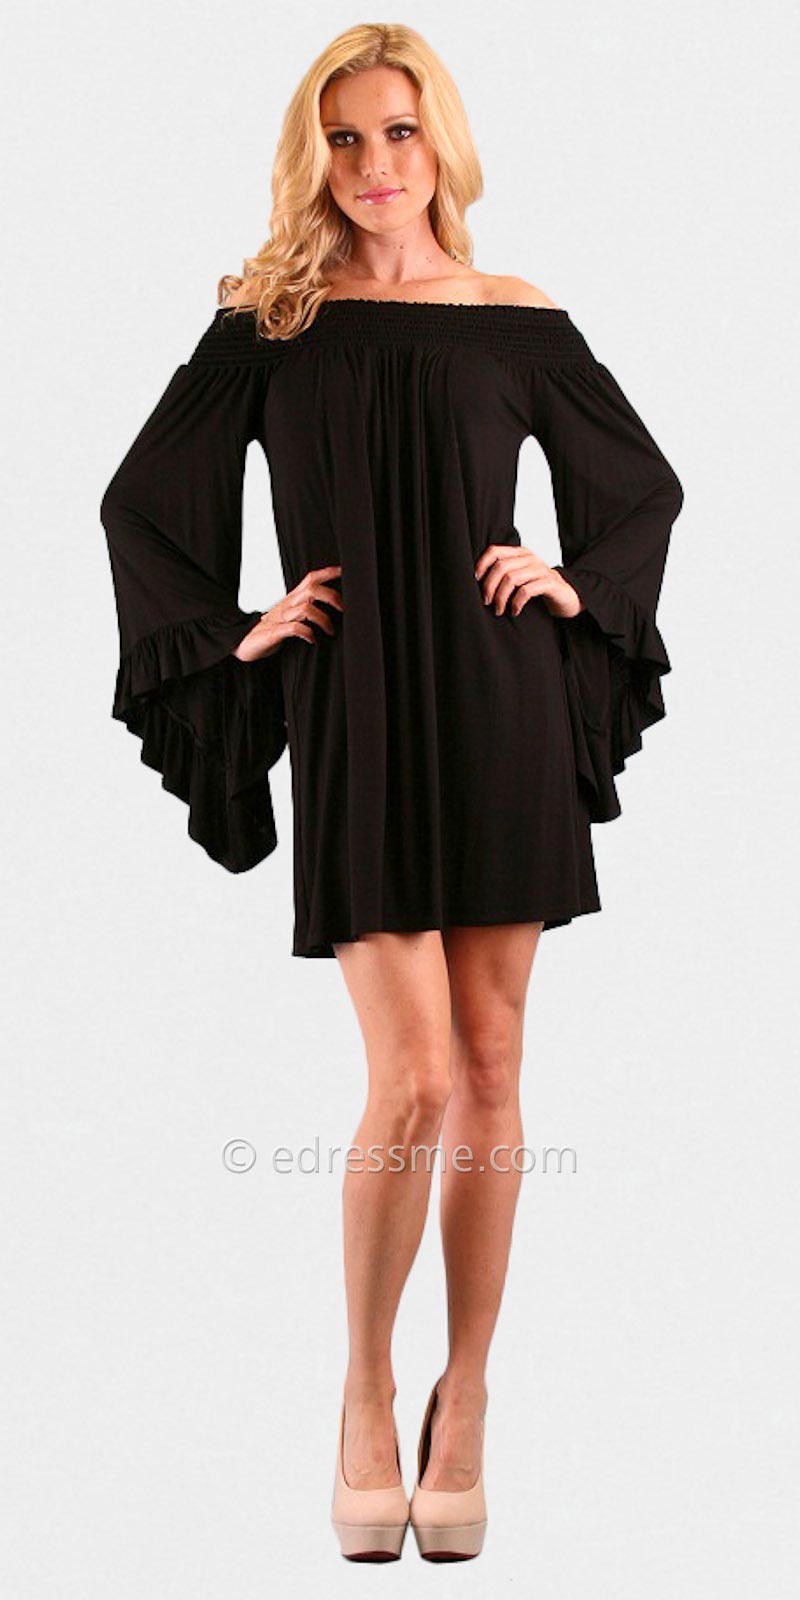 Long Sleeve Bell Sleeve Dress - New Fashion Collection